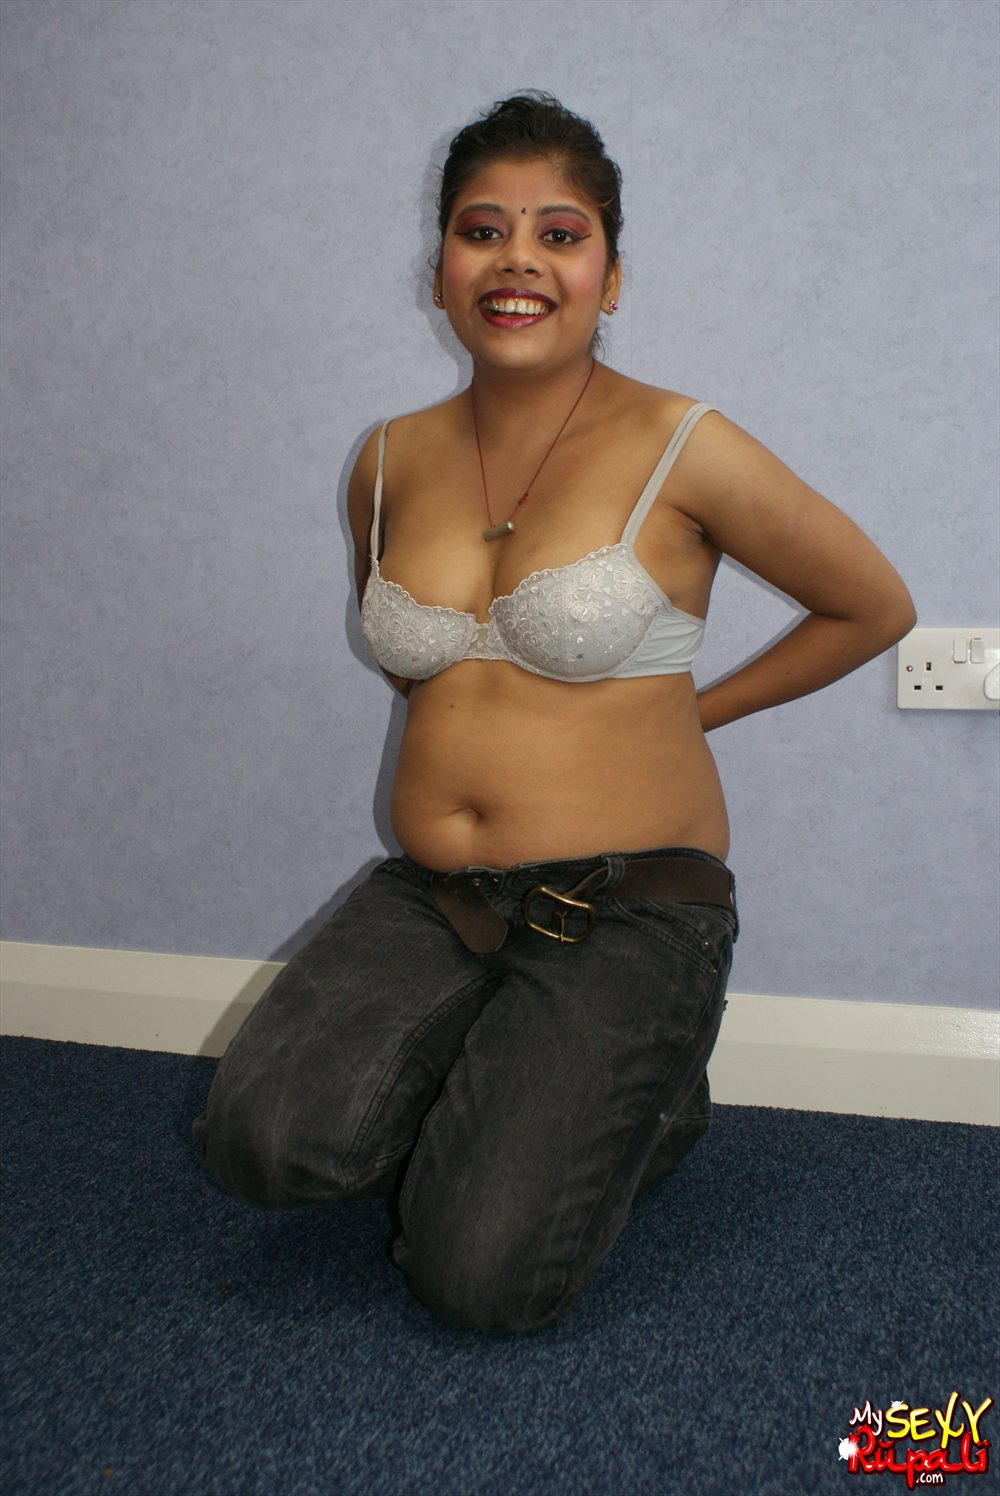 My Sexy Rupali Rupali Exposing In Her Favorite Blue Lingerie My Sexy Rupali 547152 picture image